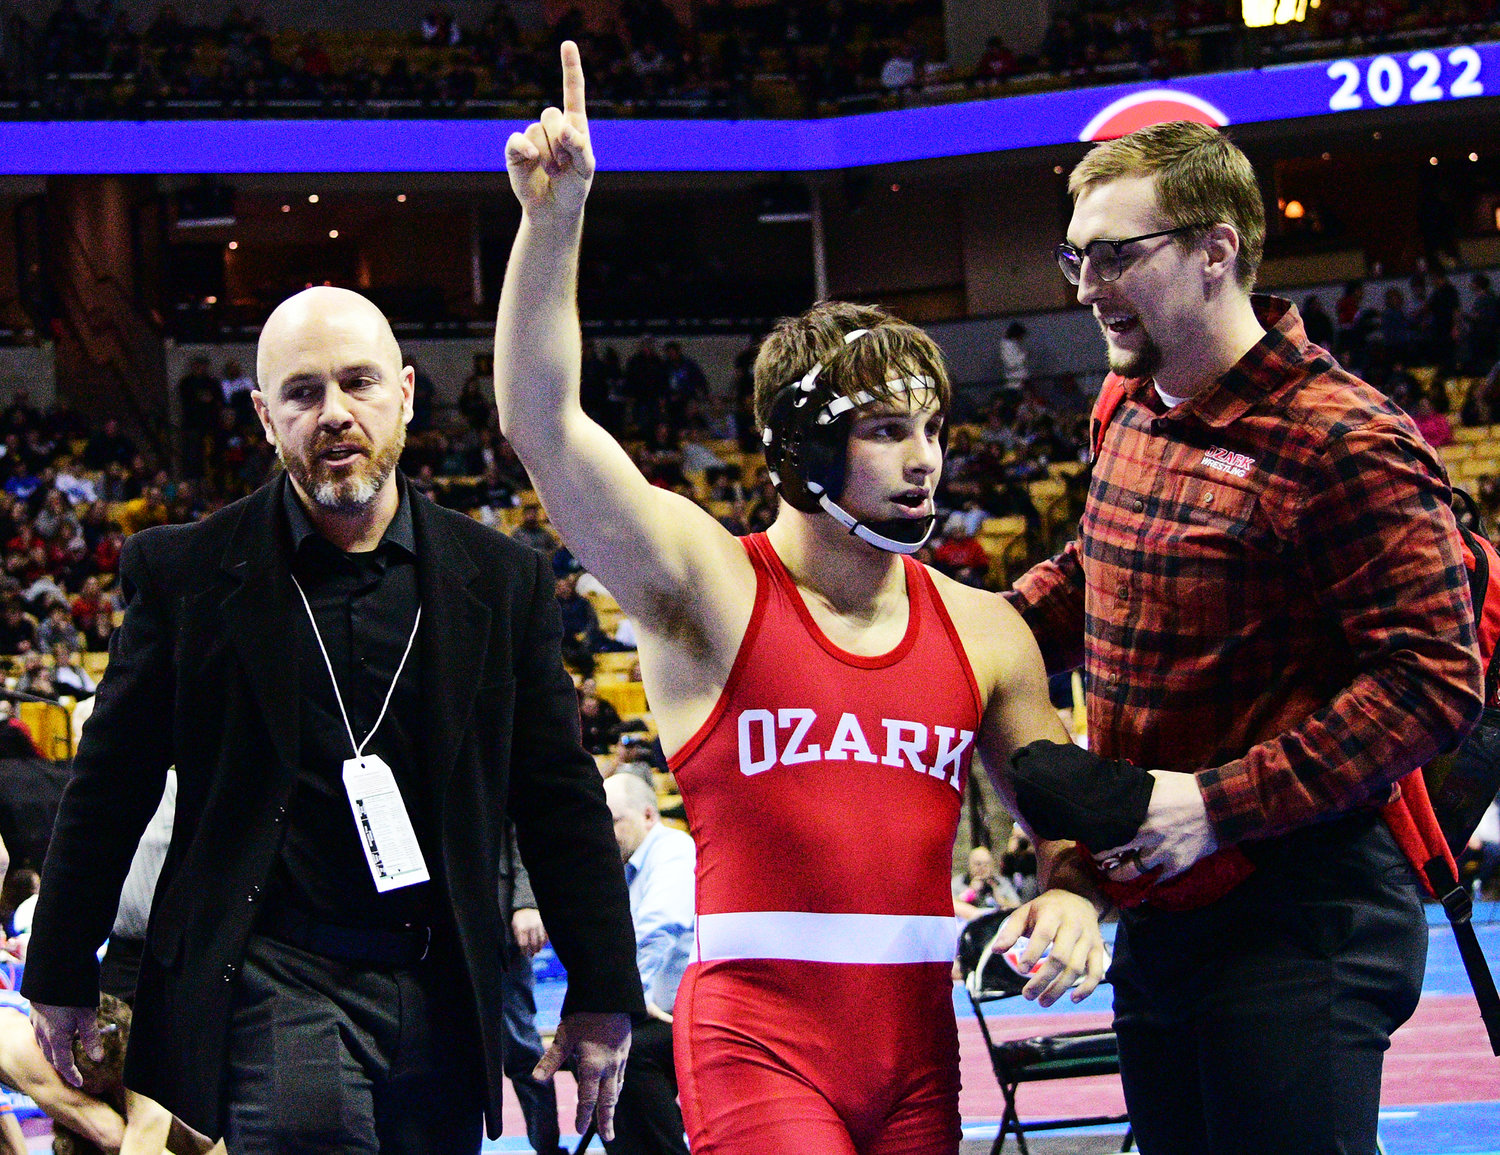 BRAXTON STRICK shows everyone who is No. 1 in Class 4 at 152 pounds.